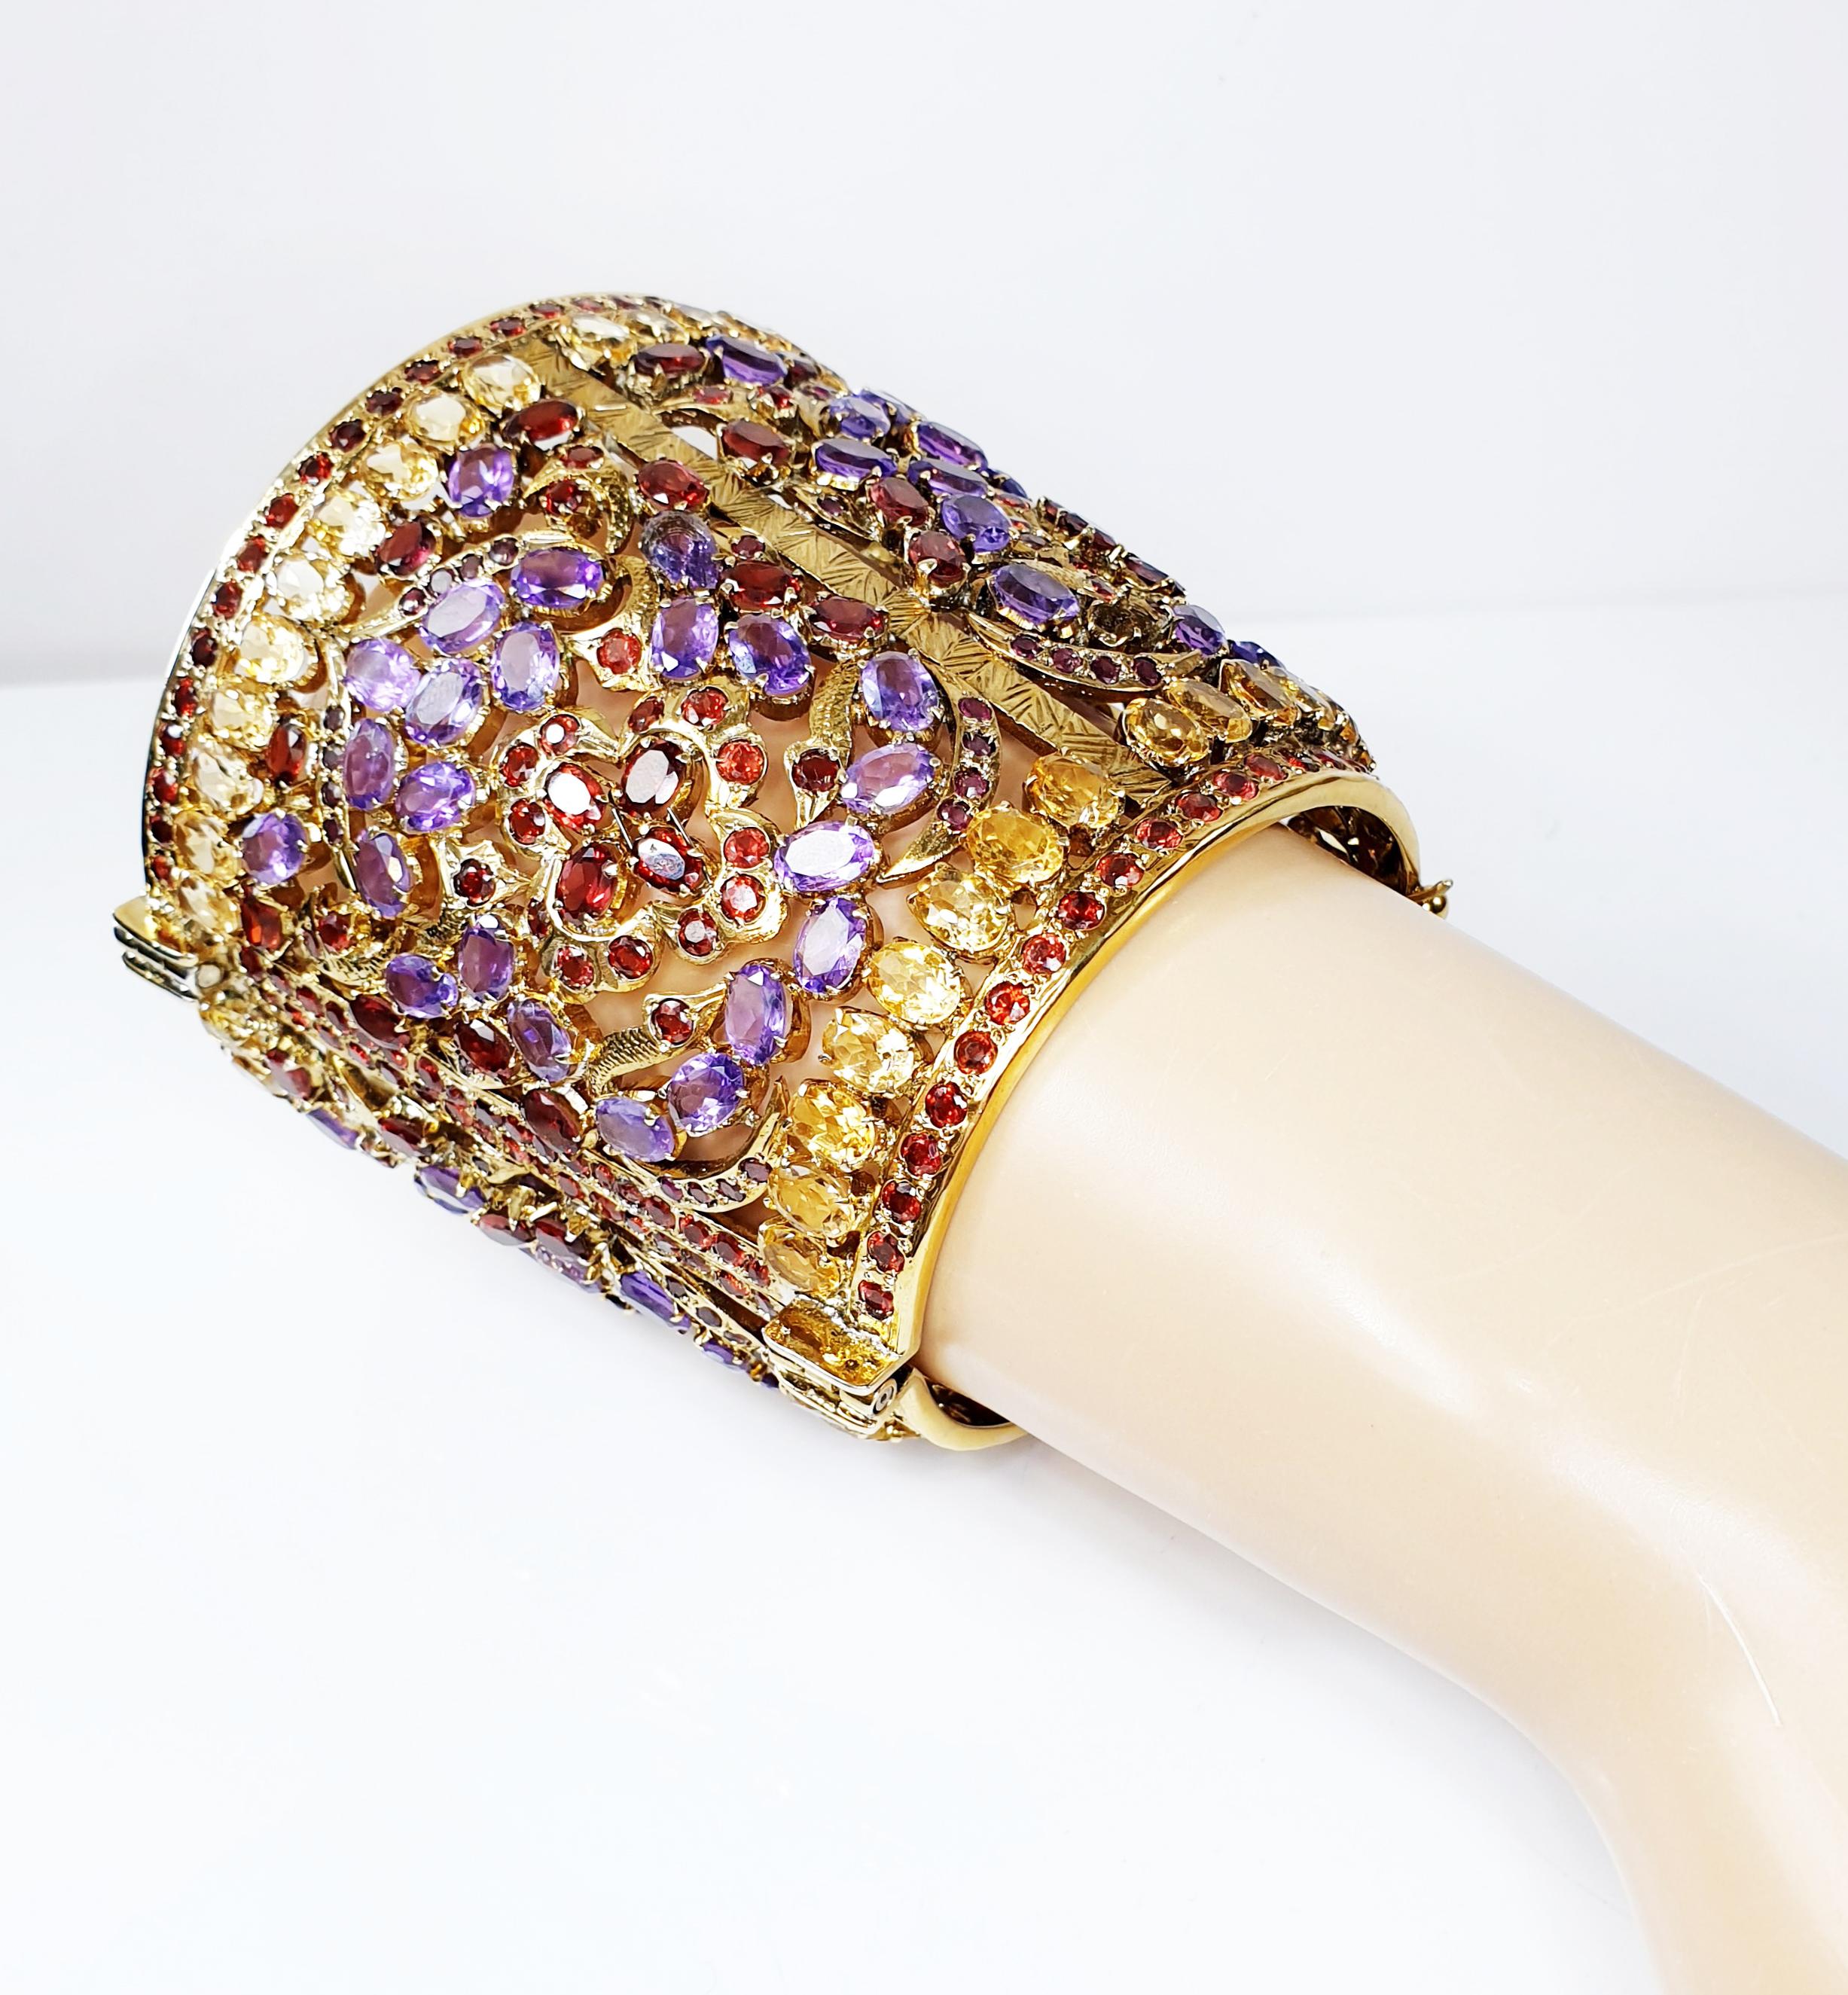 Gold-Plated Indian Cuff Bracelet with Amethysts, Citrines and Granates 2